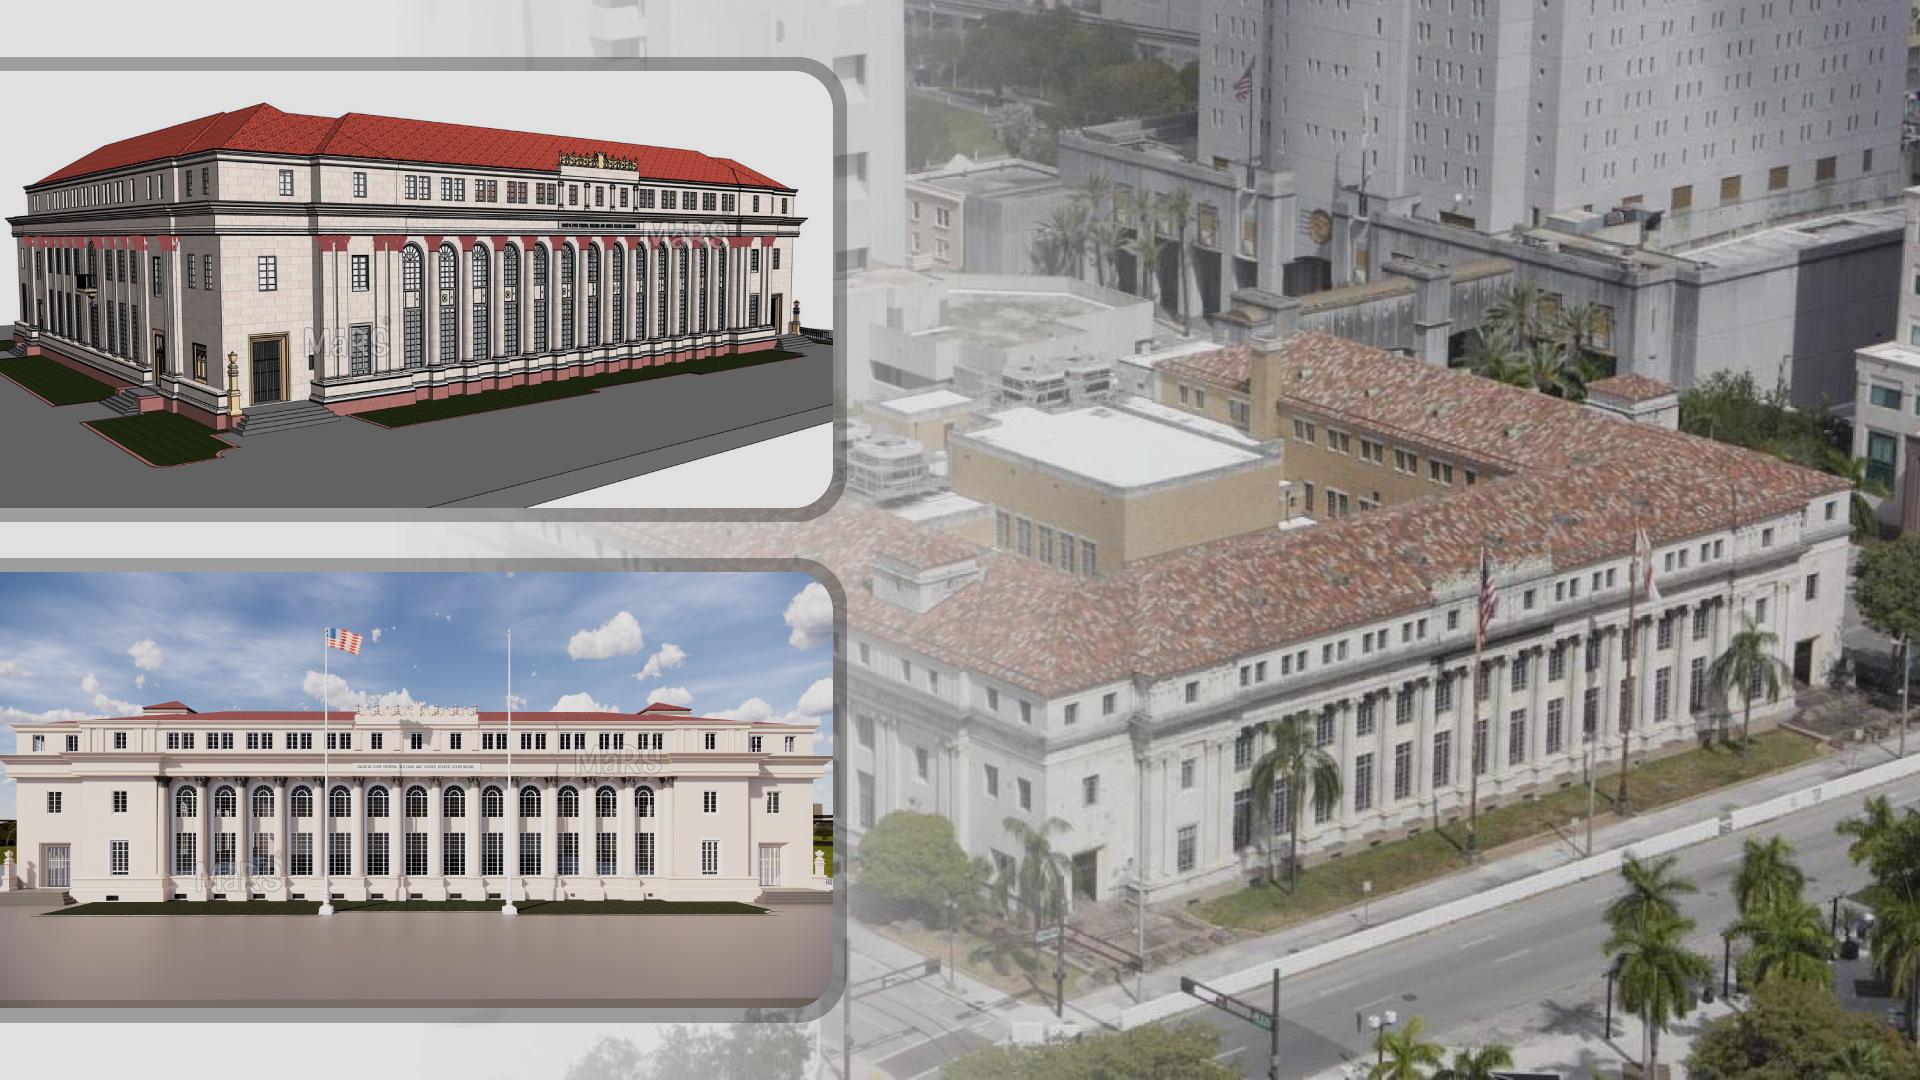 How federal building is getting a digital makeover through Scan to BIM technology?